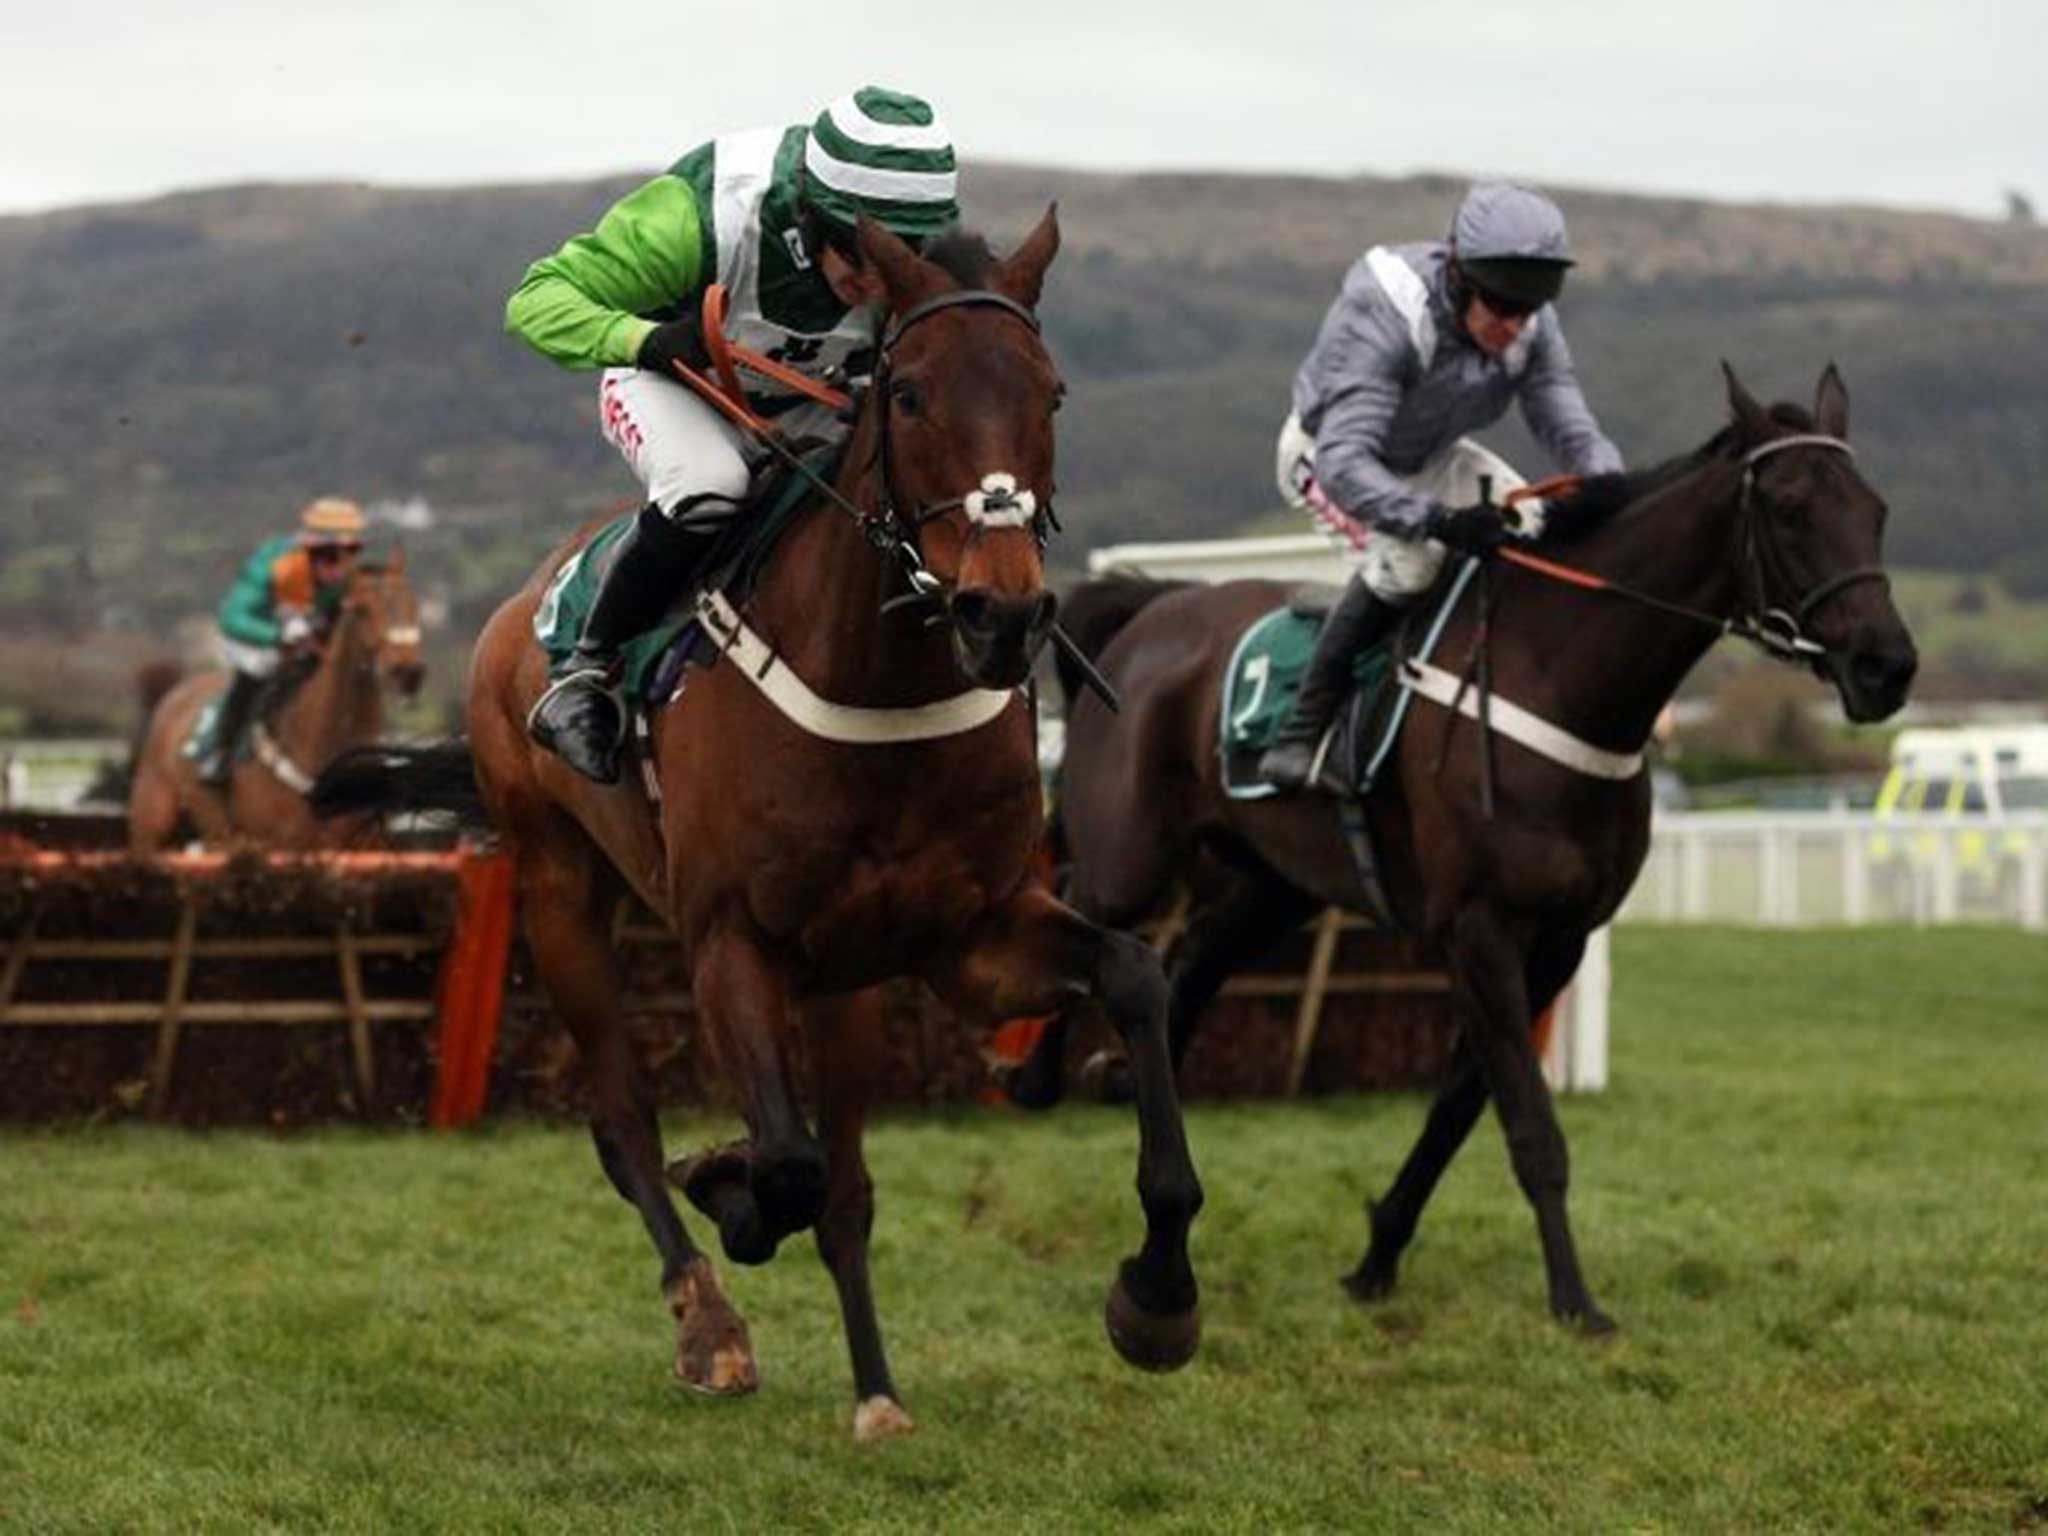 Rock on Ruby (left), ridden by Noel Fehily, is too strong up the hill for Vaniteux (Barry Geraghty) in the Dornan Engineering Hurdle at Cheltenham